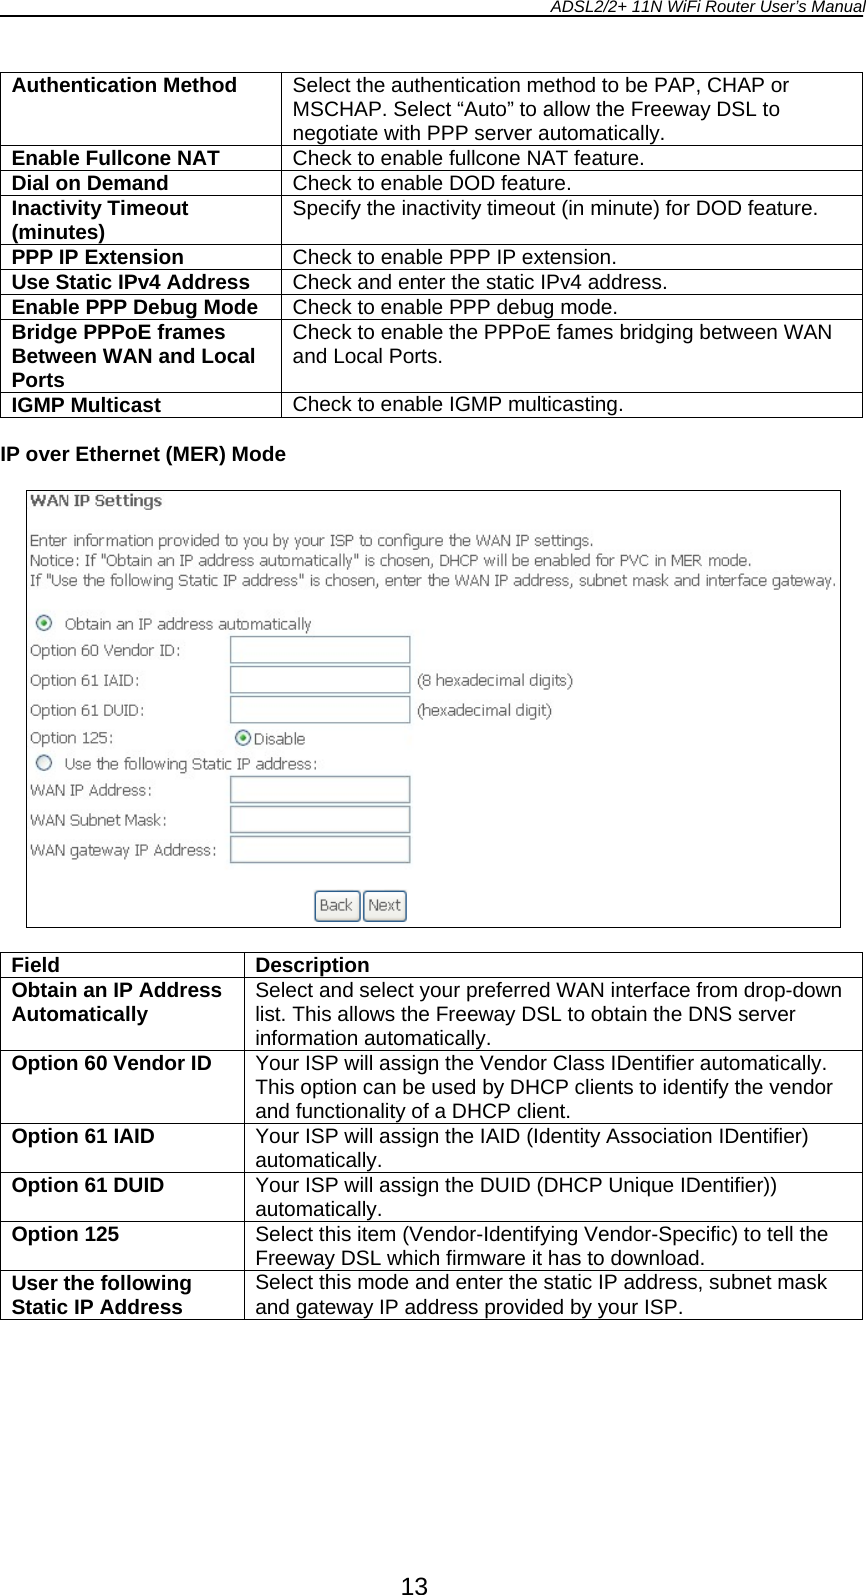 ADSL2/2+ 11N WiFi Router User’s Manual  13 Authentication Method  Select the authentication method to be PAP, CHAP or MSCHAP. Select “Auto” to allow the Freeway DSL to negotiate with PPP server automatically. Enable Fullcone NAT  Check to enable fullcone NAT feature. Dial on Demand  Check to enable DOD feature. Inactivity Timeout (minutes)   Specify the inactivity timeout (in minute) for DOD feature. PPP IP Extension  Check to enable PPP IP extension. Use Static IPv4 Address  Check and enter the static IPv4 address. Enable PPP Debug Mode  Check to enable PPP debug mode. Bridge PPPoE frames Between WAN and Local Ports Check to enable the PPPoE fames bridging between WAN and Local Ports. IGMP Multicast  Check to enable IGMP multicasting.  IP over Ethernet (MER) Mode    Field Description Obtain an IP Address Automatically  Select and select your preferred WAN interface from drop-down list. This allows the Freeway DSL to obtain the DNS server information automatically. Option 60 Vendor ID  Your ISP will assign the Vendor Class IDentifier automatically. This option can be used by DHCP clients to identify the vendor and functionality of a DHCP client. Option 61 IAID  Your ISP will assign the IAID (Identity Association IDentifier) automatically. Option 61 DUID  Your ISP will assign the DUID (DHCP Unique IDentifier)) automatically. Option 125  Select this item (Vendor-Identifying Vendor-Specific) to tell the Freeway DSL which firmware it has to download. User the following Static IP Address  Select this mode and enter the static IP address, subnet mask and gateway IP address provided by your ISP.  